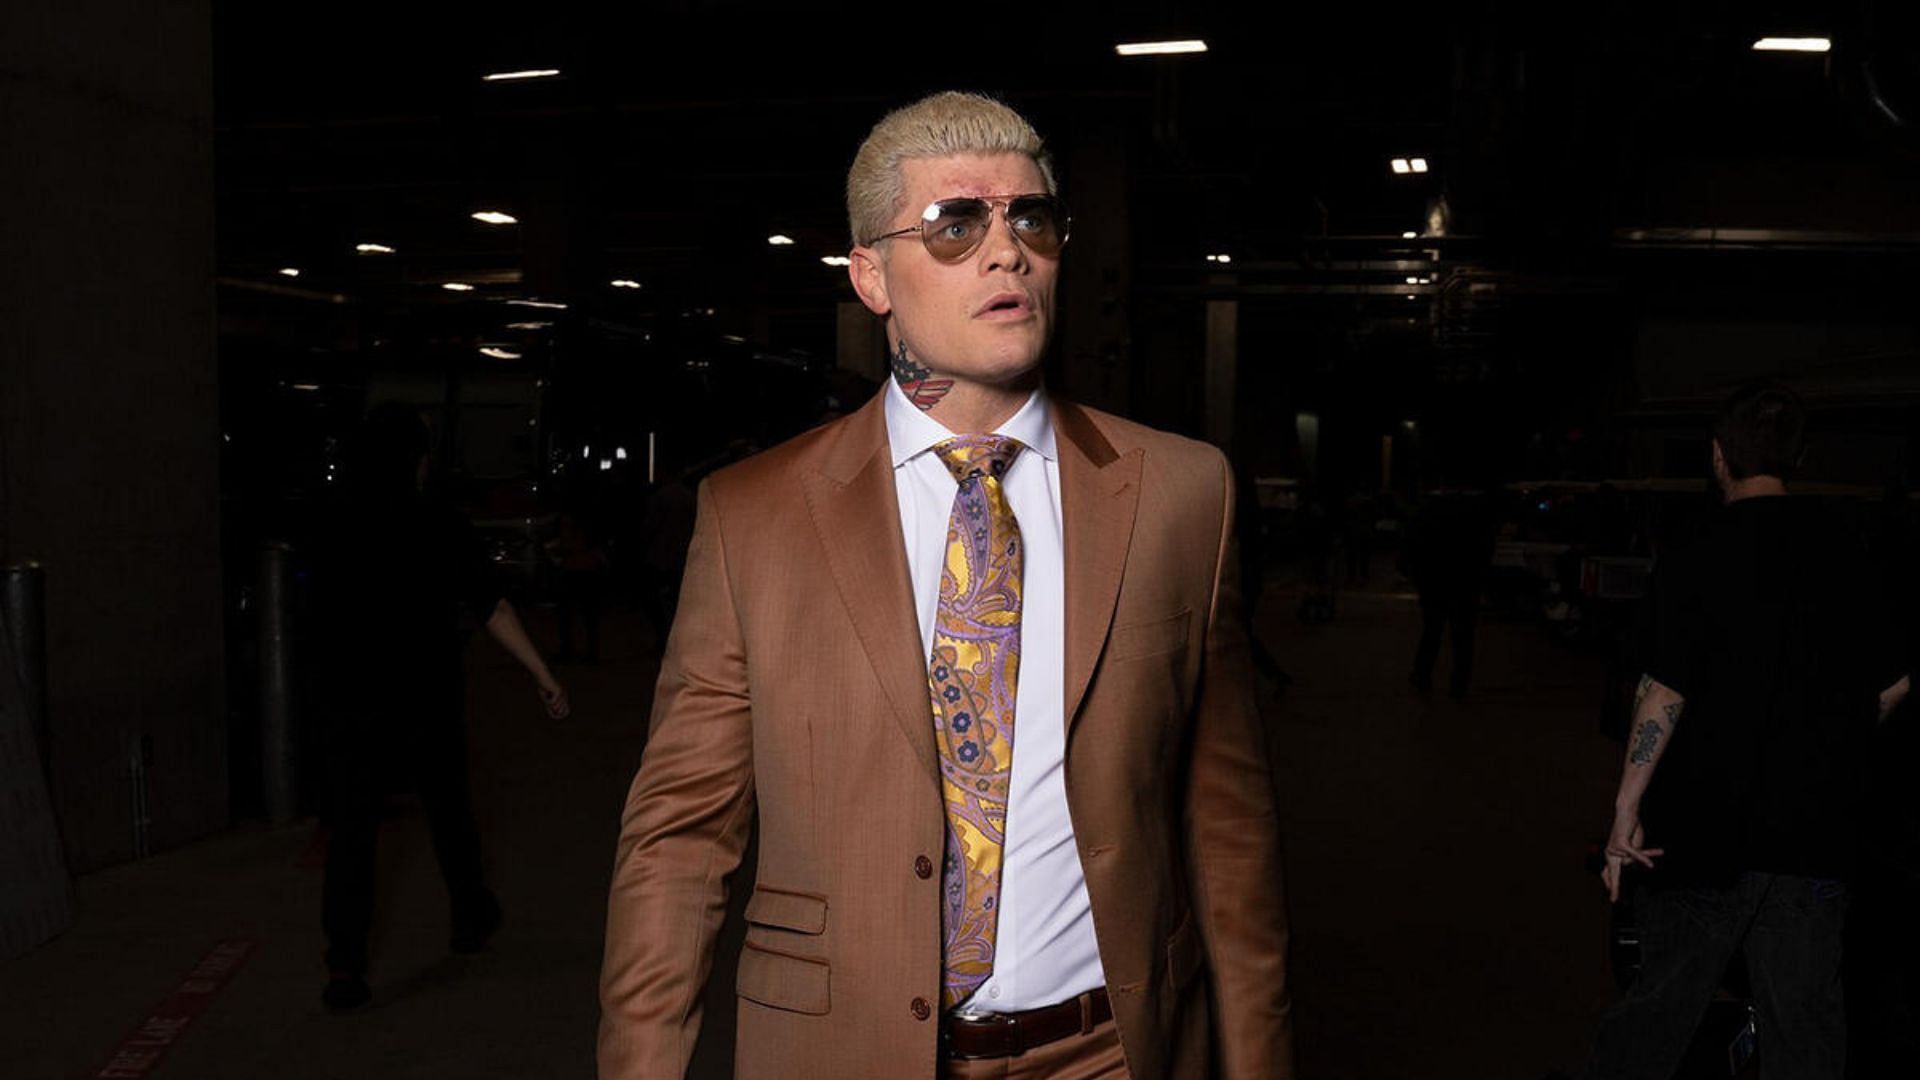 Cody Rhodes was an Excecutive Vice President of AEW [Photo courtesy of WWE